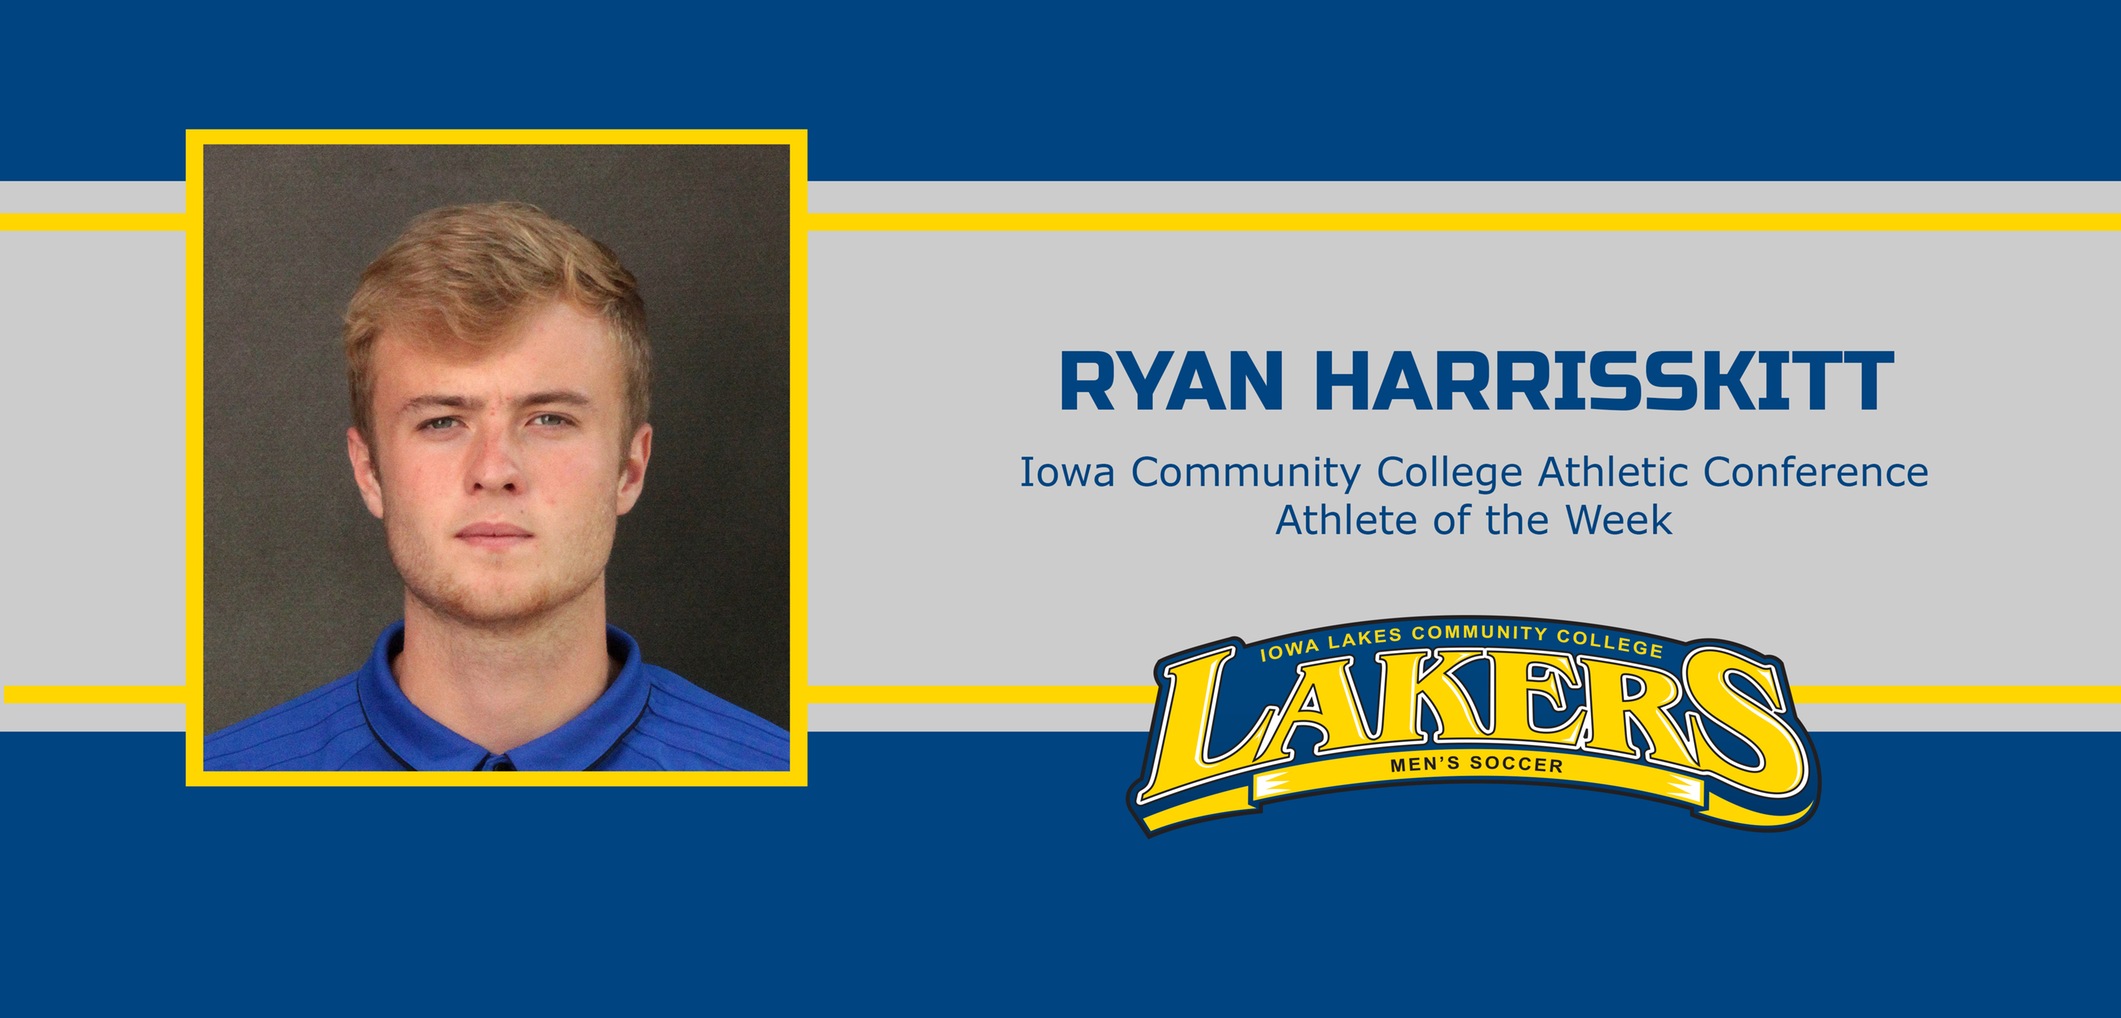 Ryan Harrisskitt receives goalkeeper of the week for his second time this season.